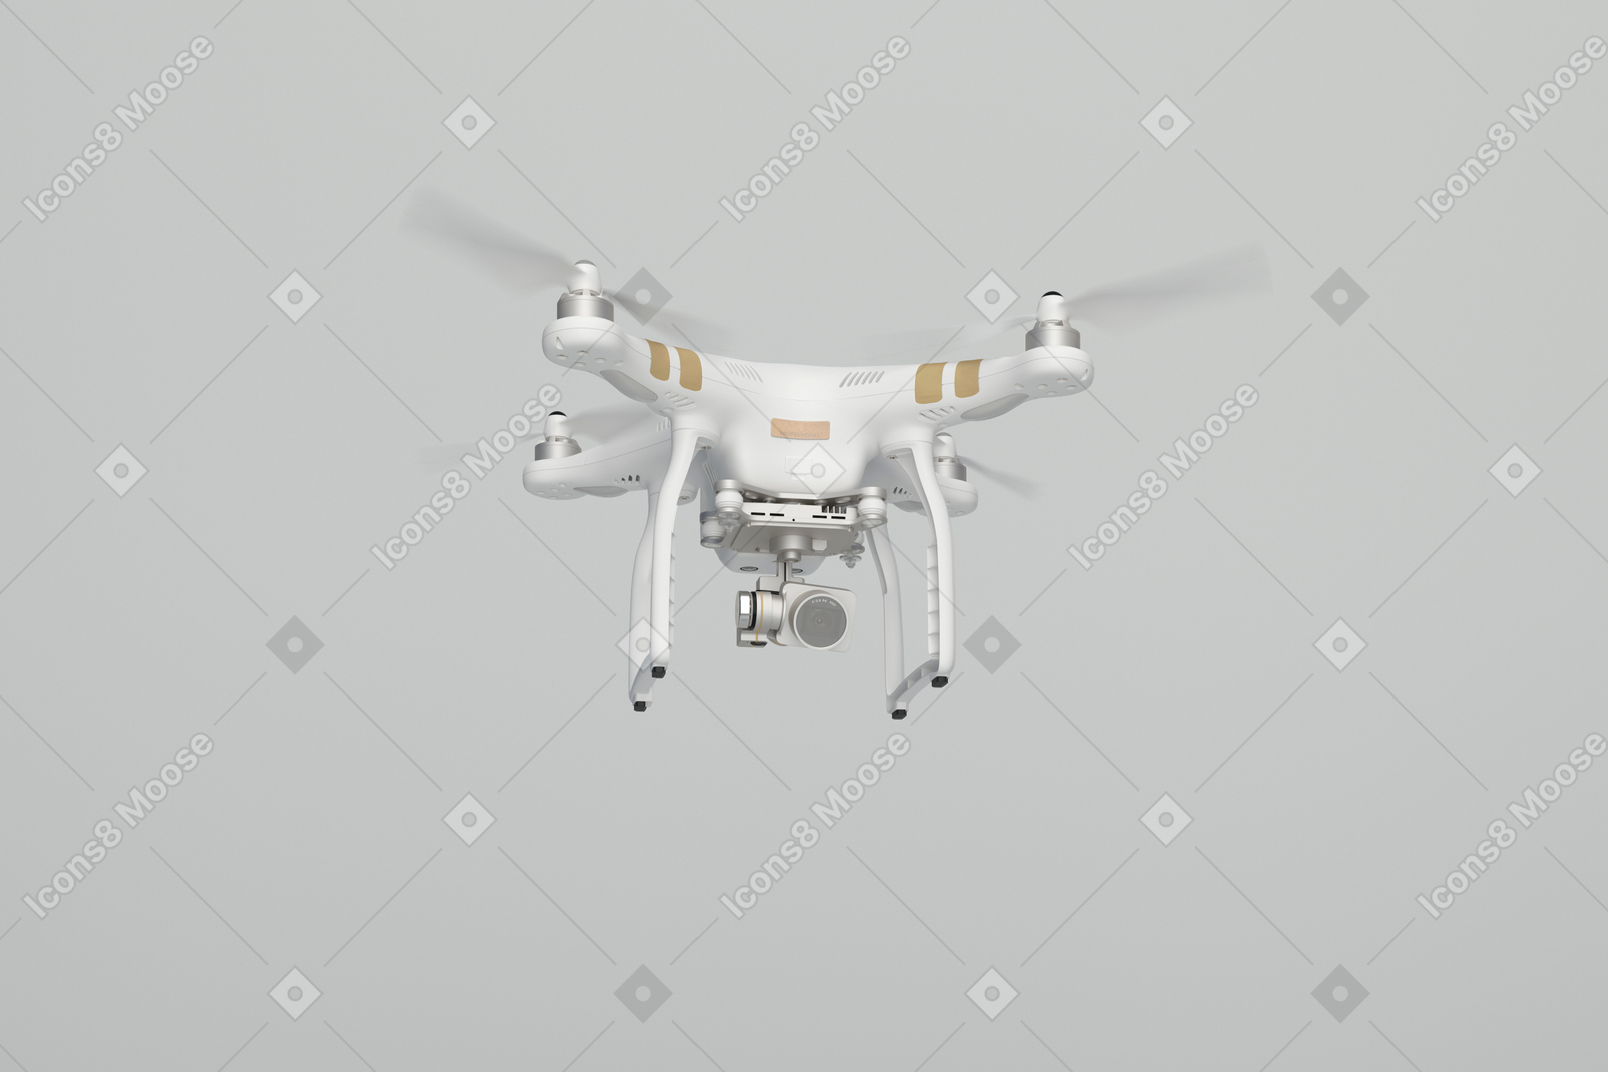 Flying quadcopter